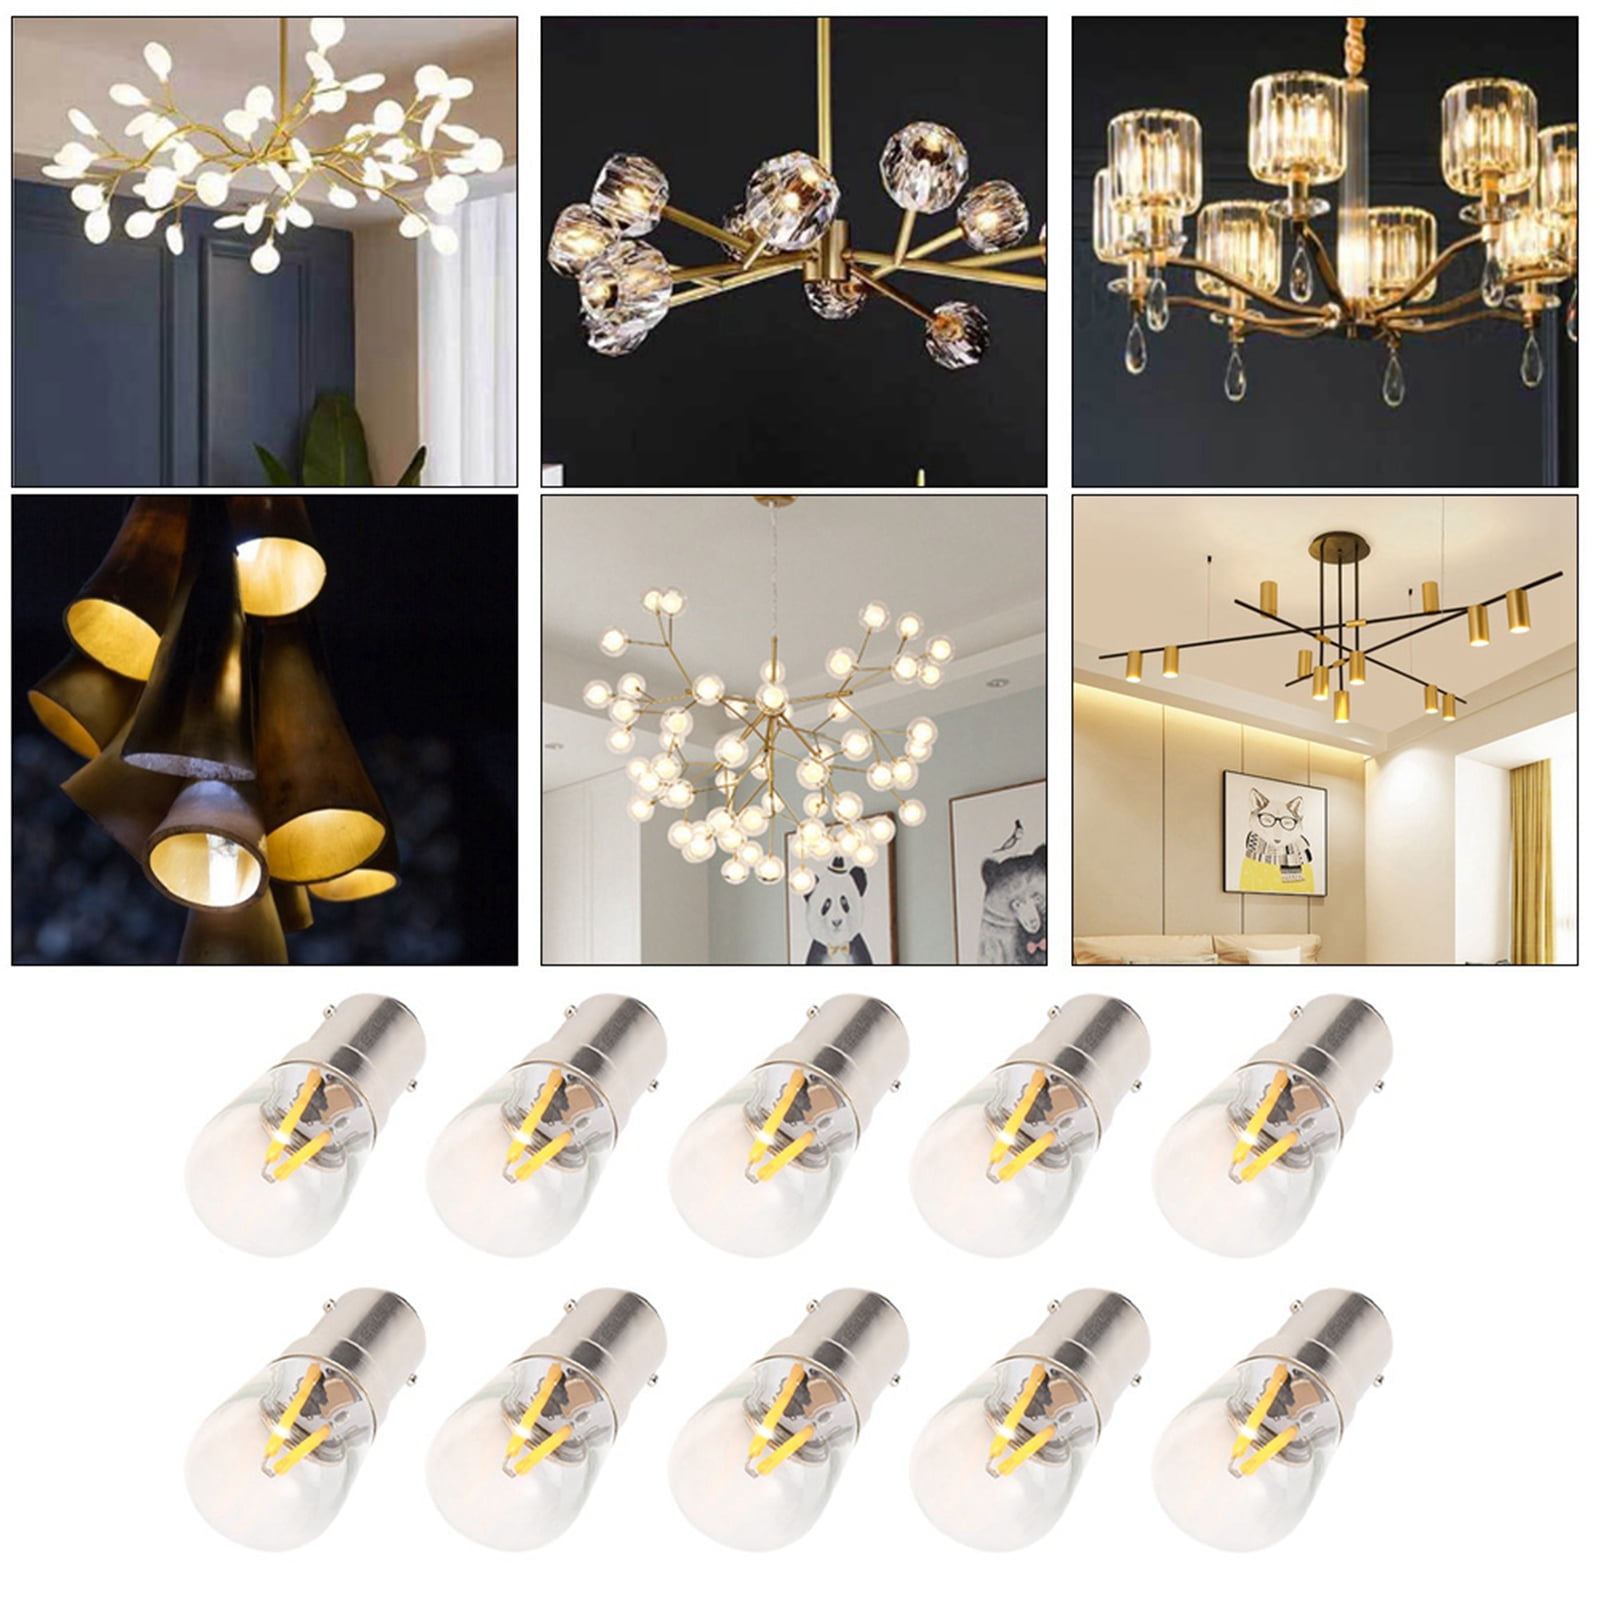 B15 LED Bulb, 50,000 Hours Home Lighting, 1.5W Light Easily Installed Light Replacement Parts, Table Lamps For Home Cabinet Lamps Wall Lamps - Walmart.com